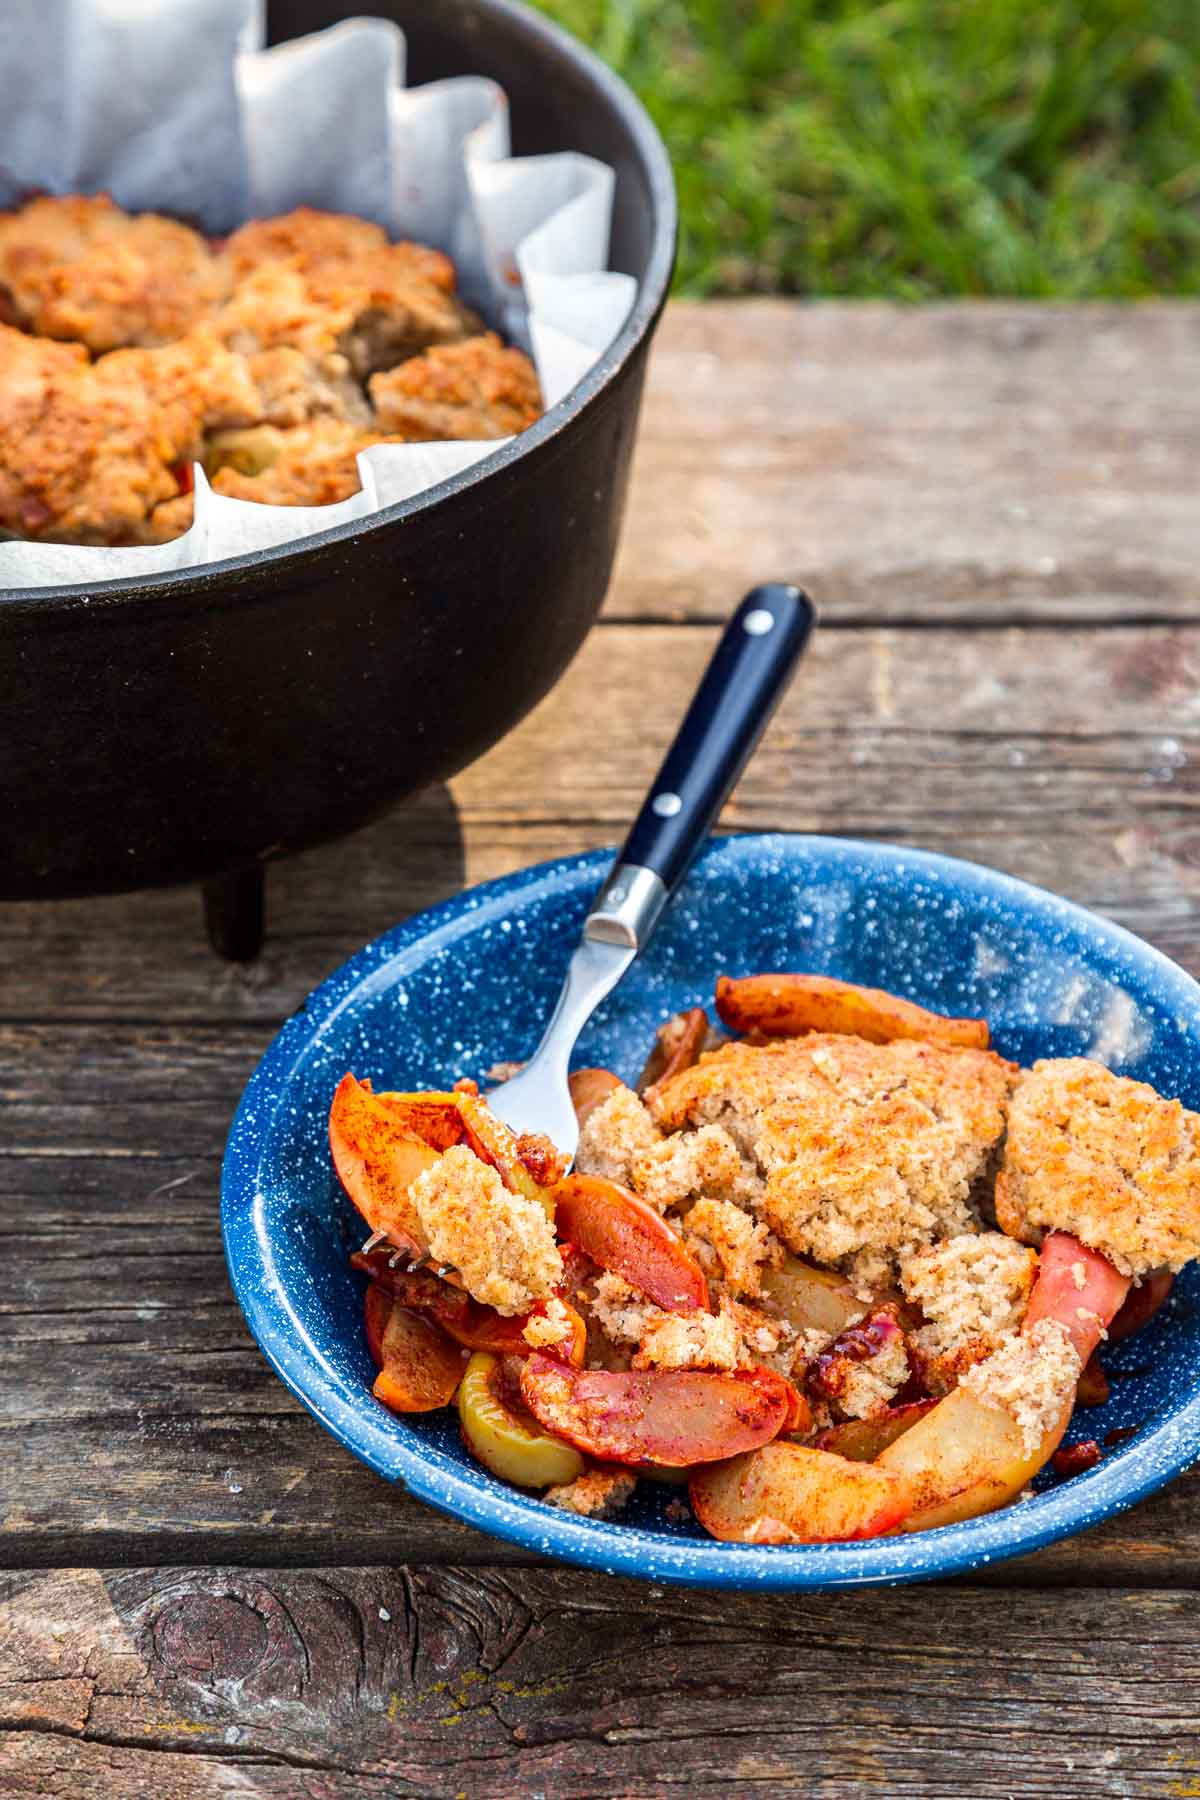 Apple cobbler in a blue bowl with a fork next to a Dutch oven